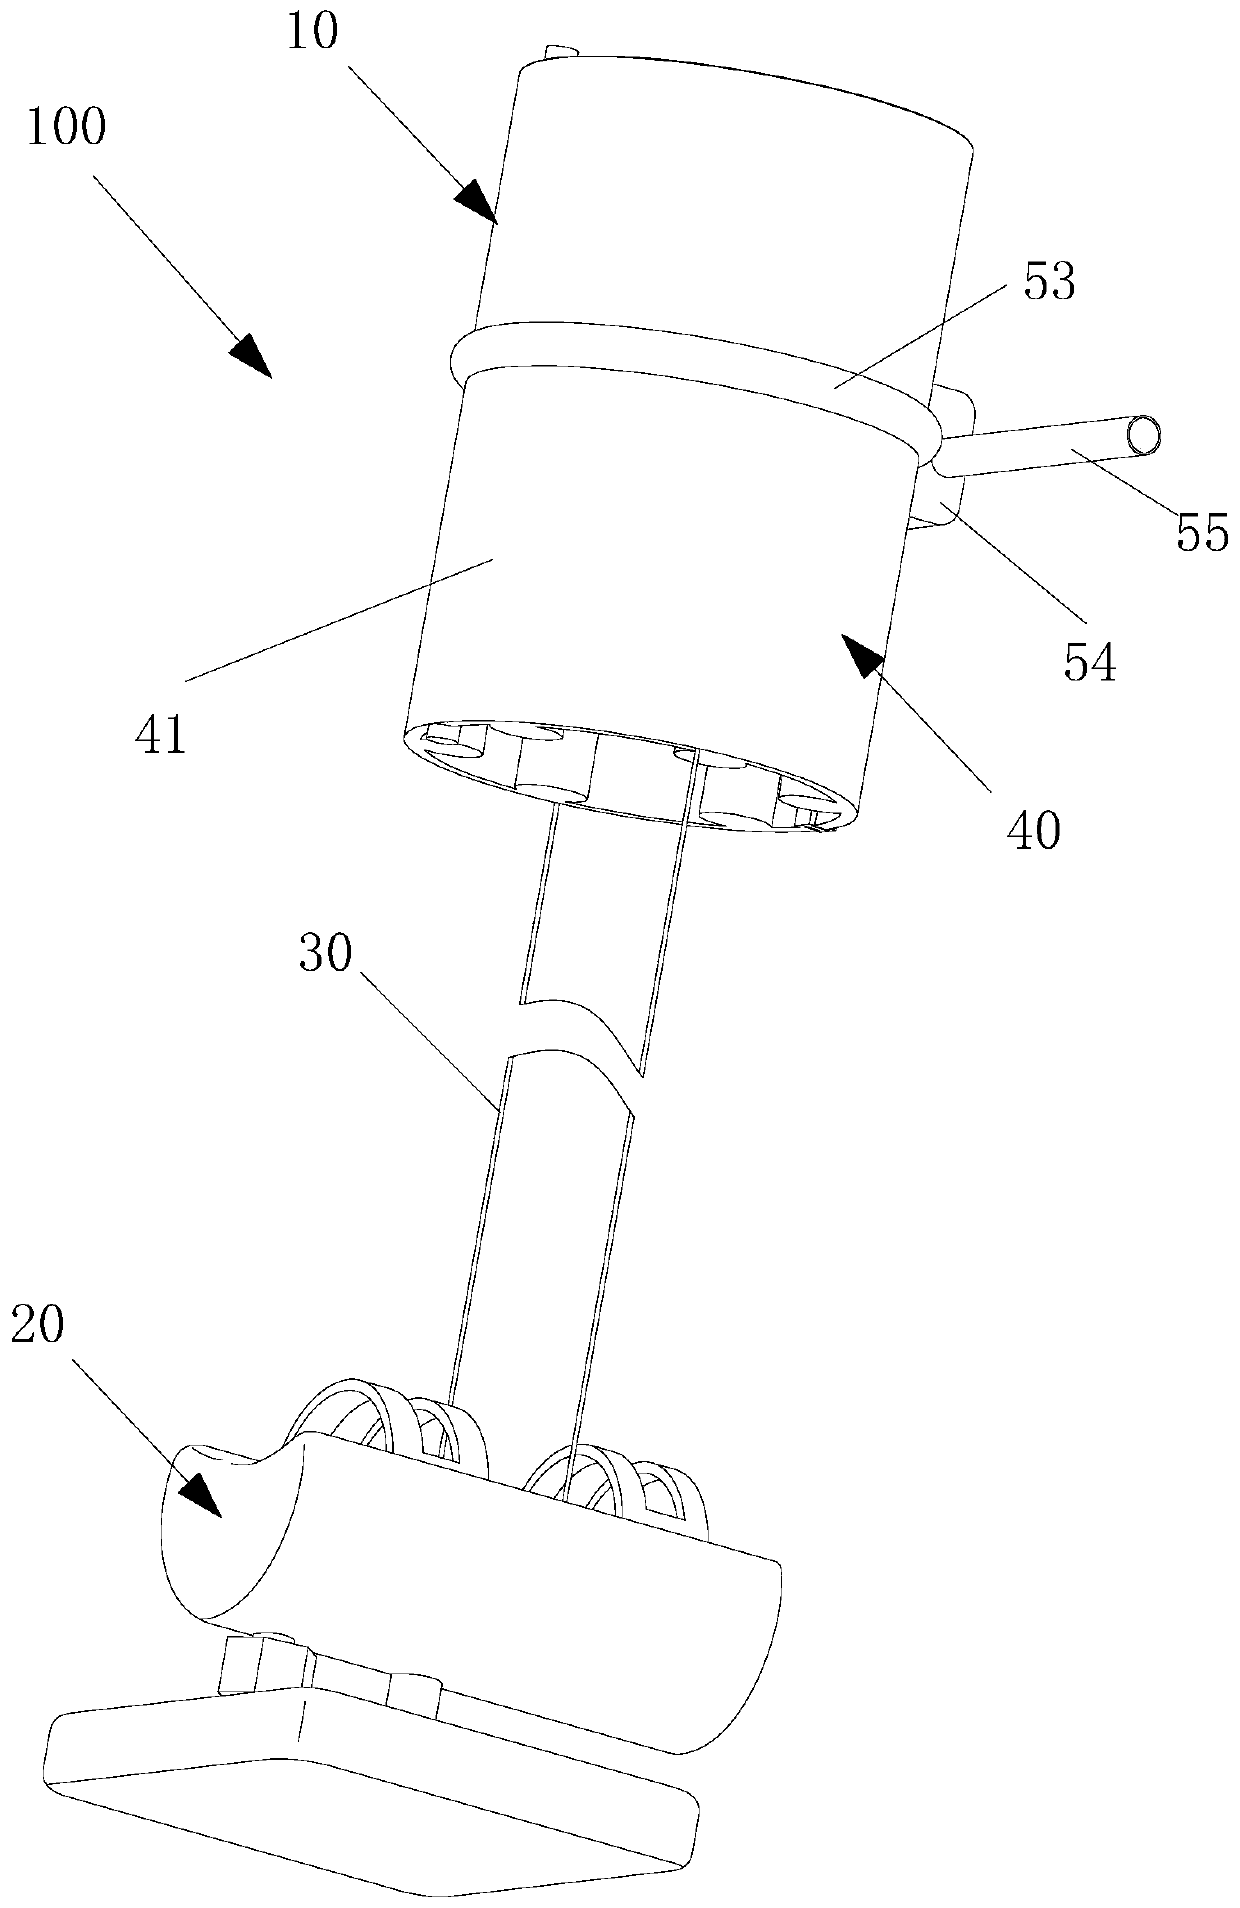 Lower limb abduction centering and fixing device